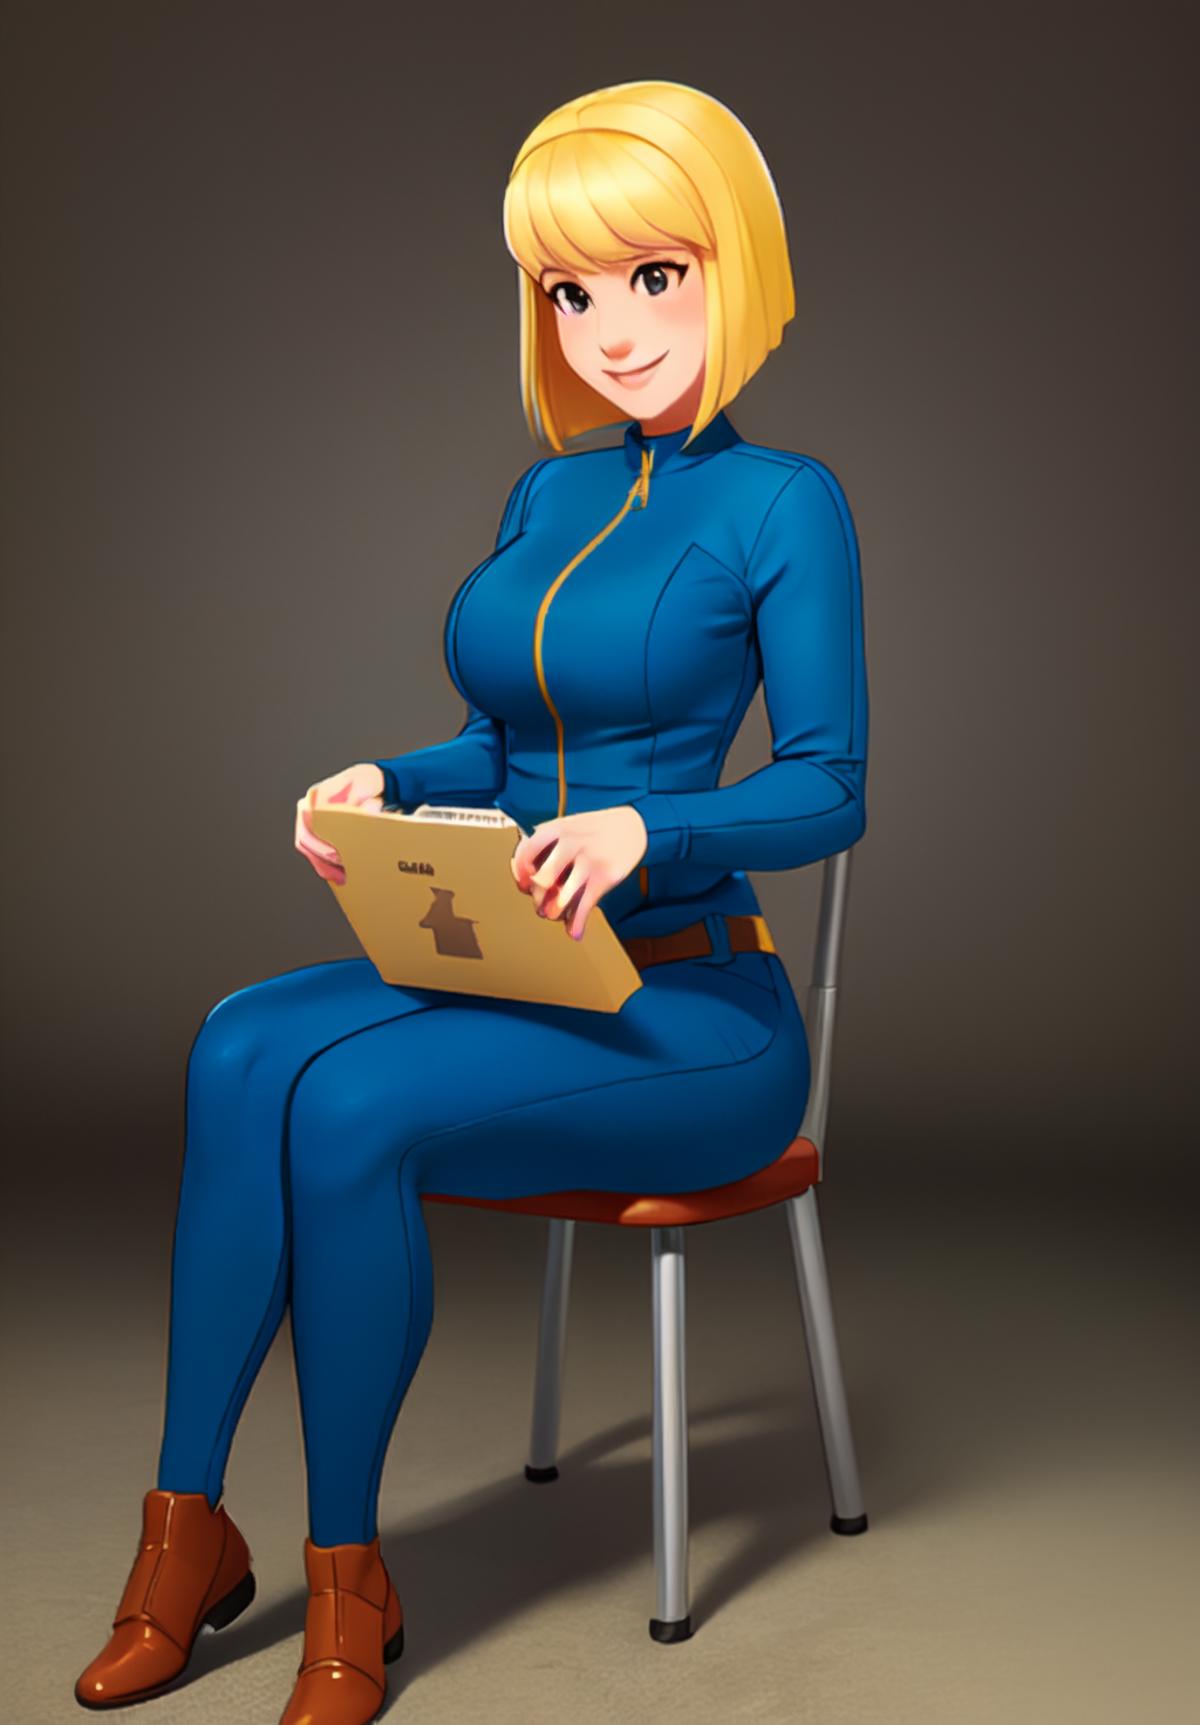 Vault-Girl - Fallout image by AsaTyr